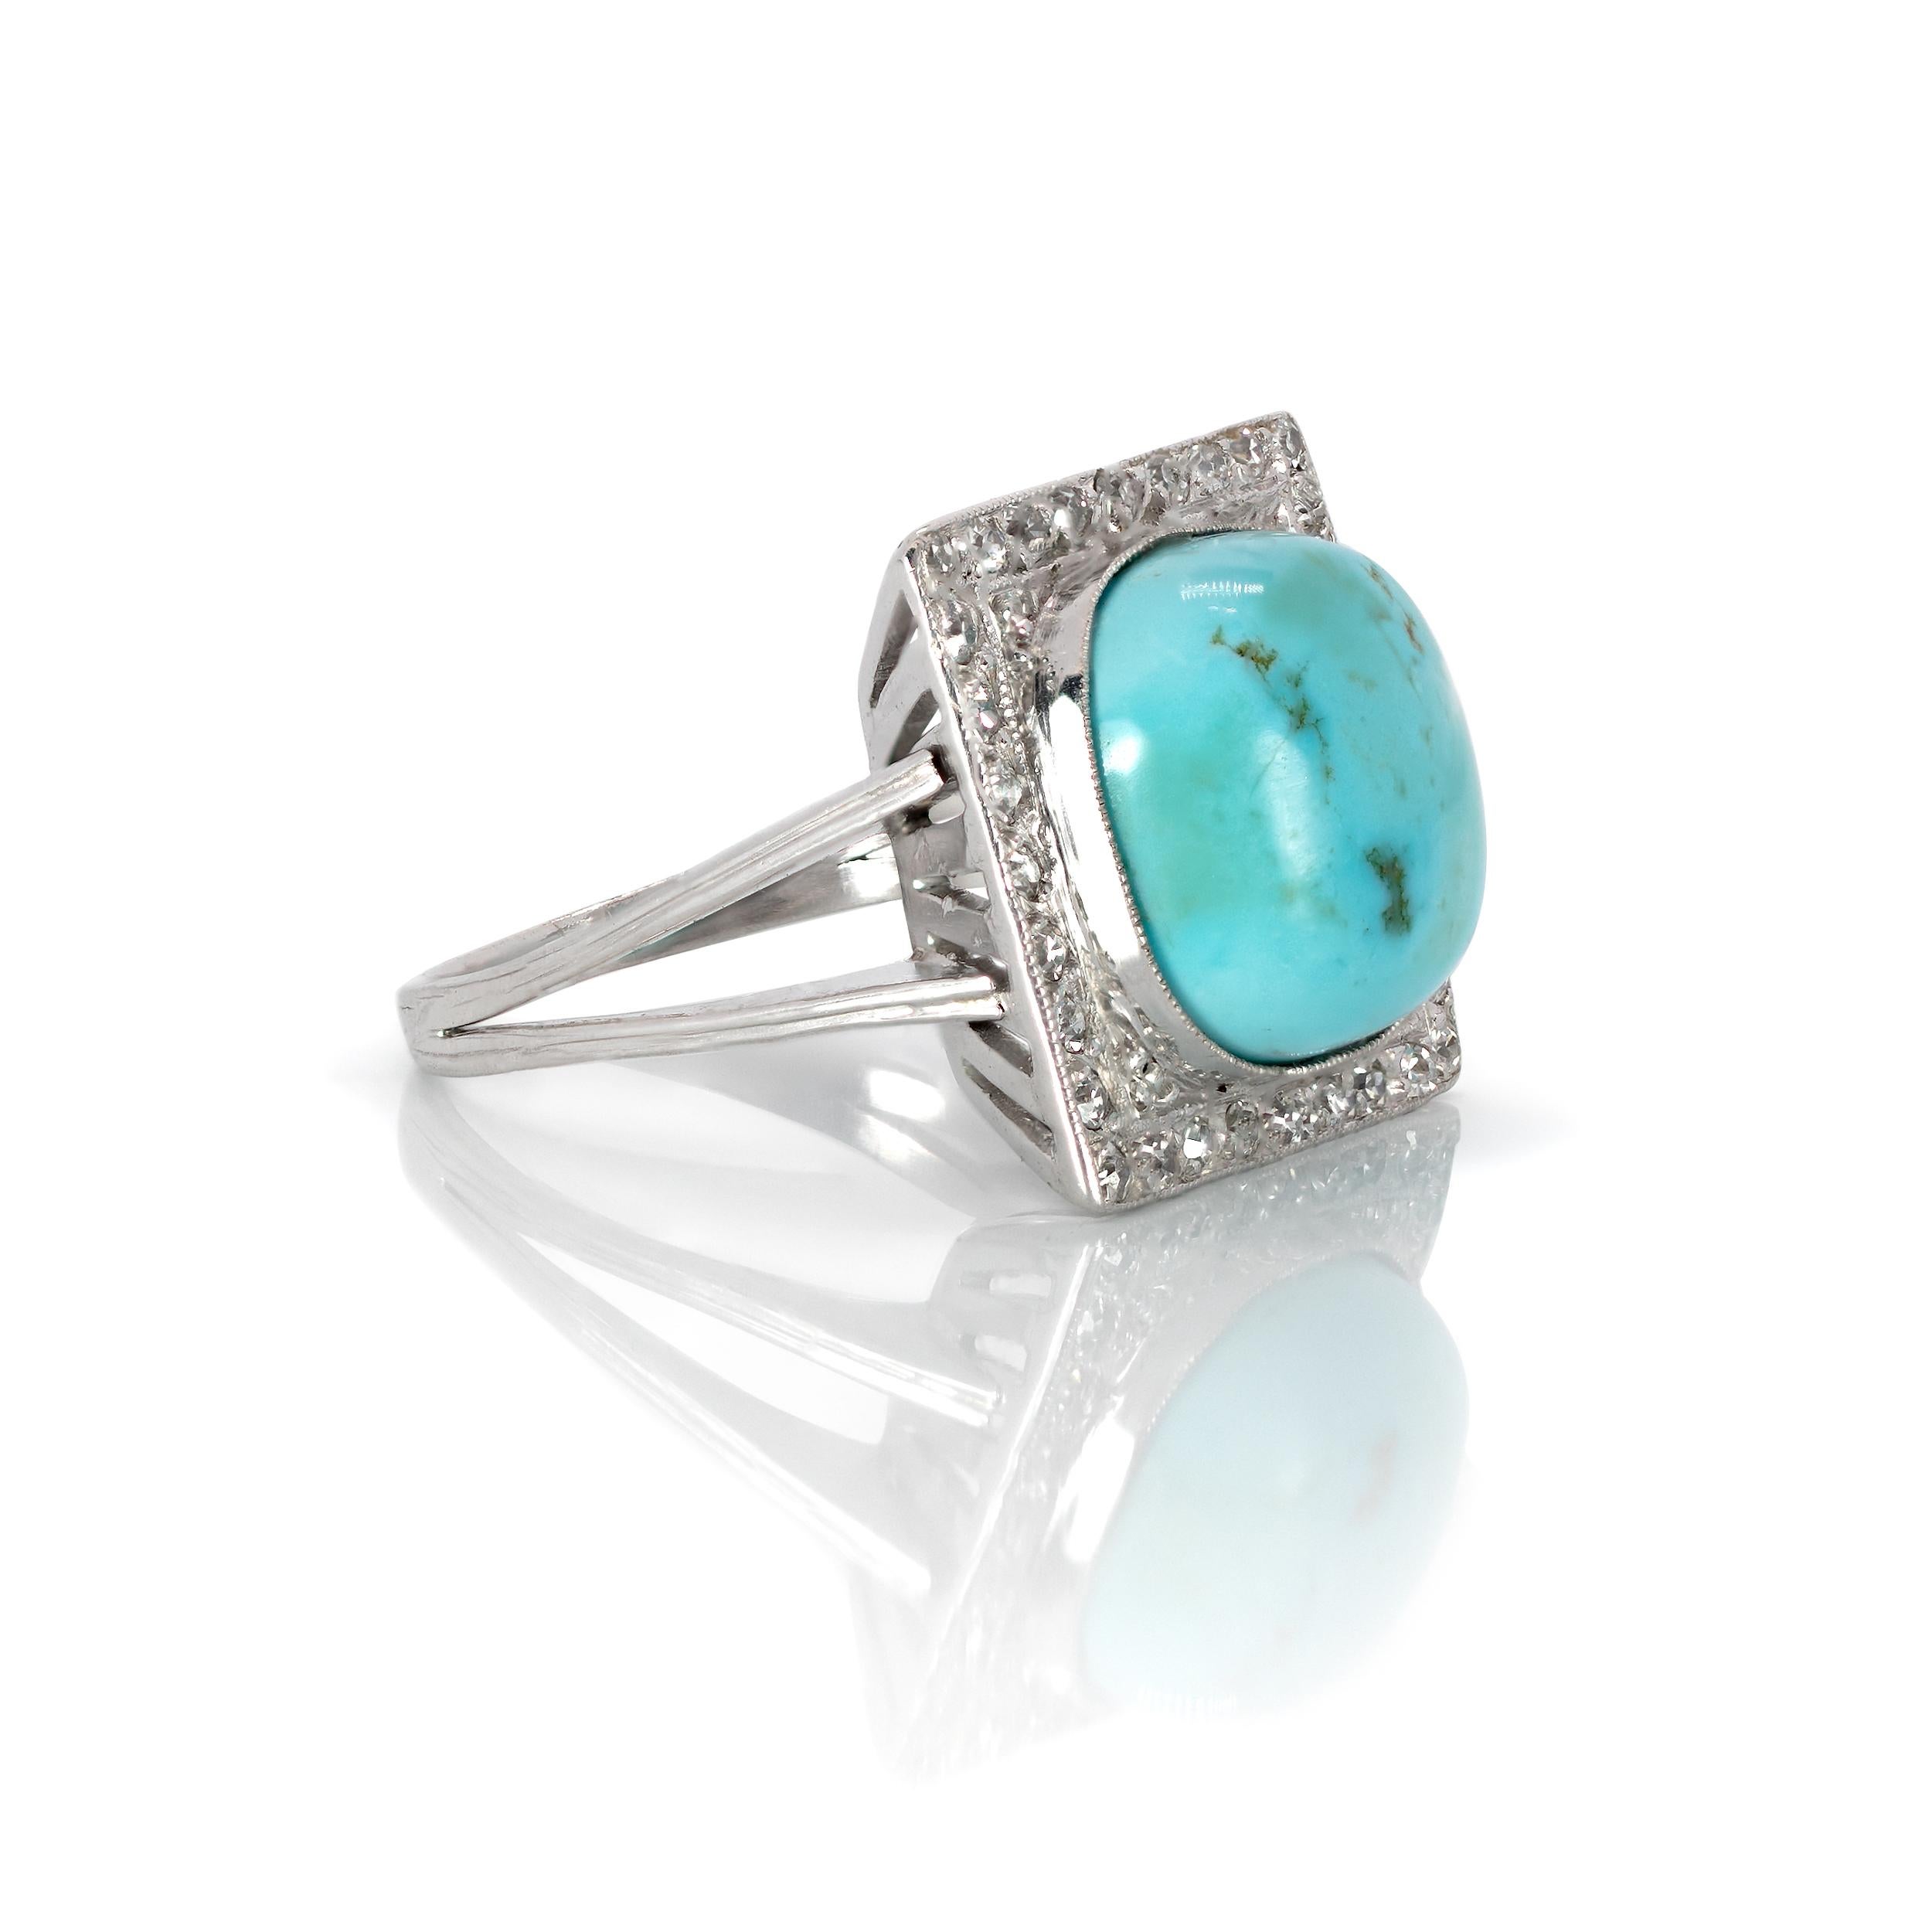 Turquoise has long been appreciated for its color of blue that brings the cheeriness of the sunny sky. It has always been the symbol for hope. Our Hope Ring is a glorious vintage find that inspired a coordinating Double-strand Necklace and Earrings